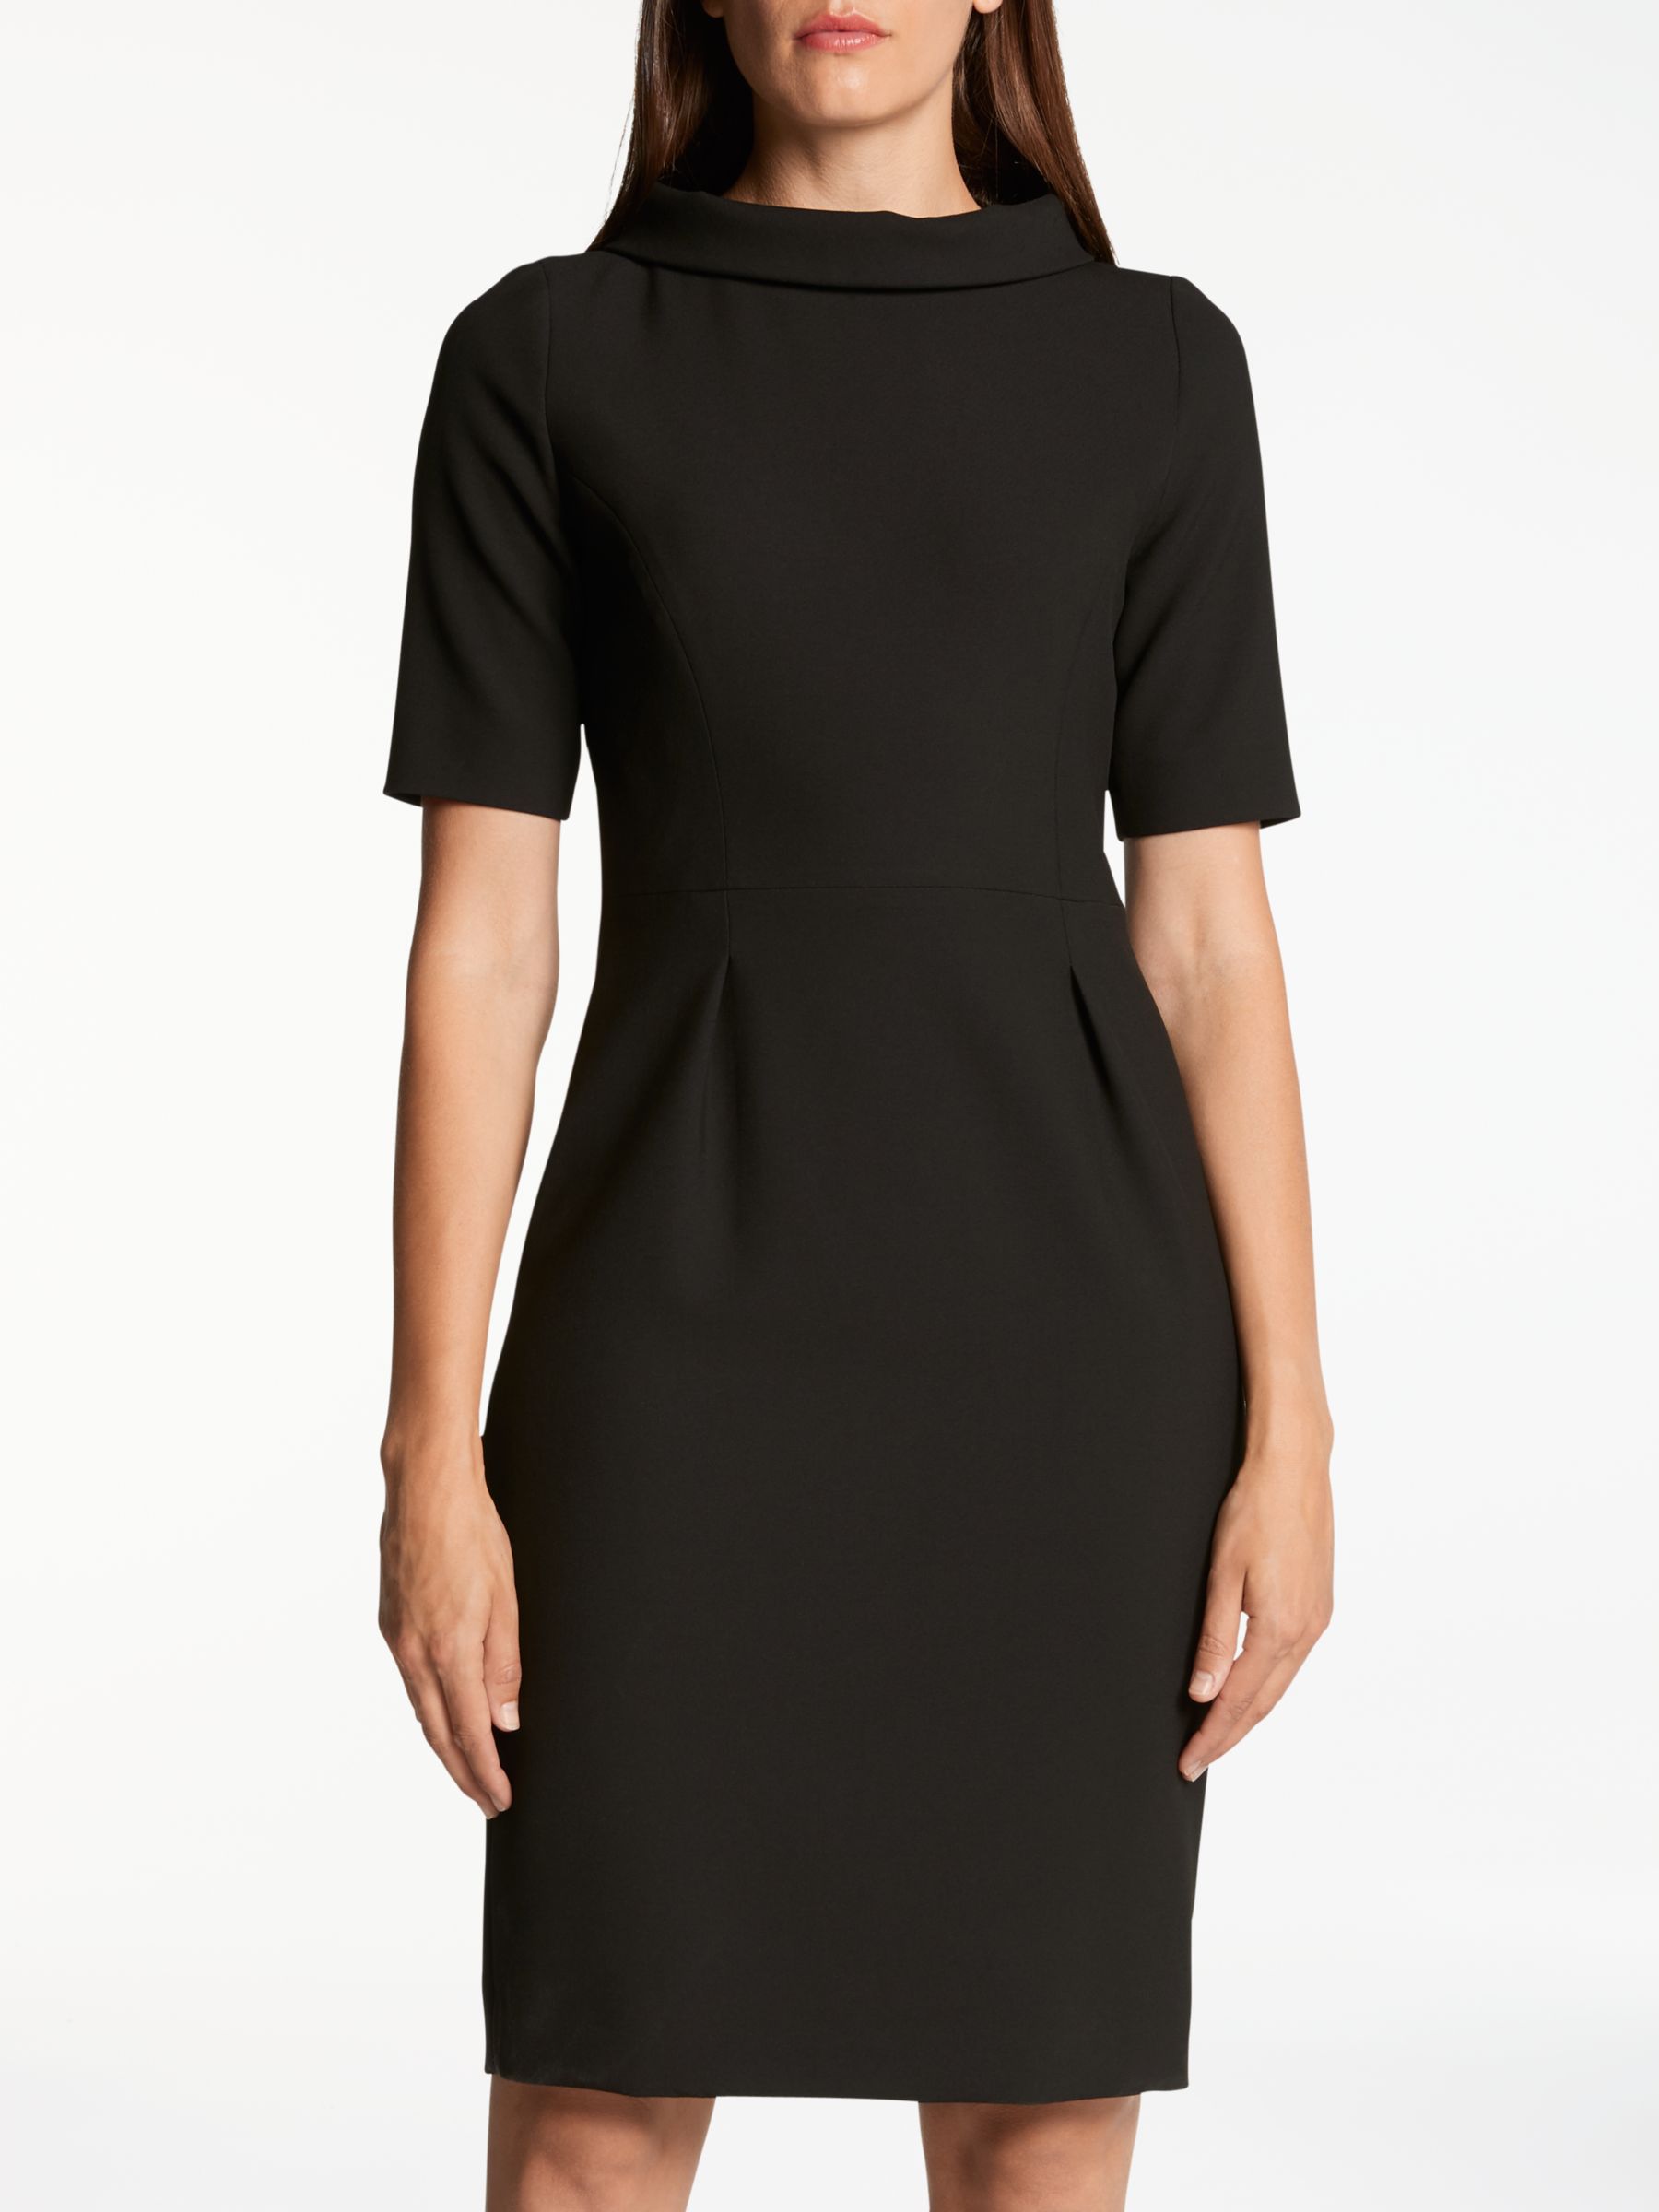 Bruce by Bruce Oldfield Picture Collar Dress, Black, 10